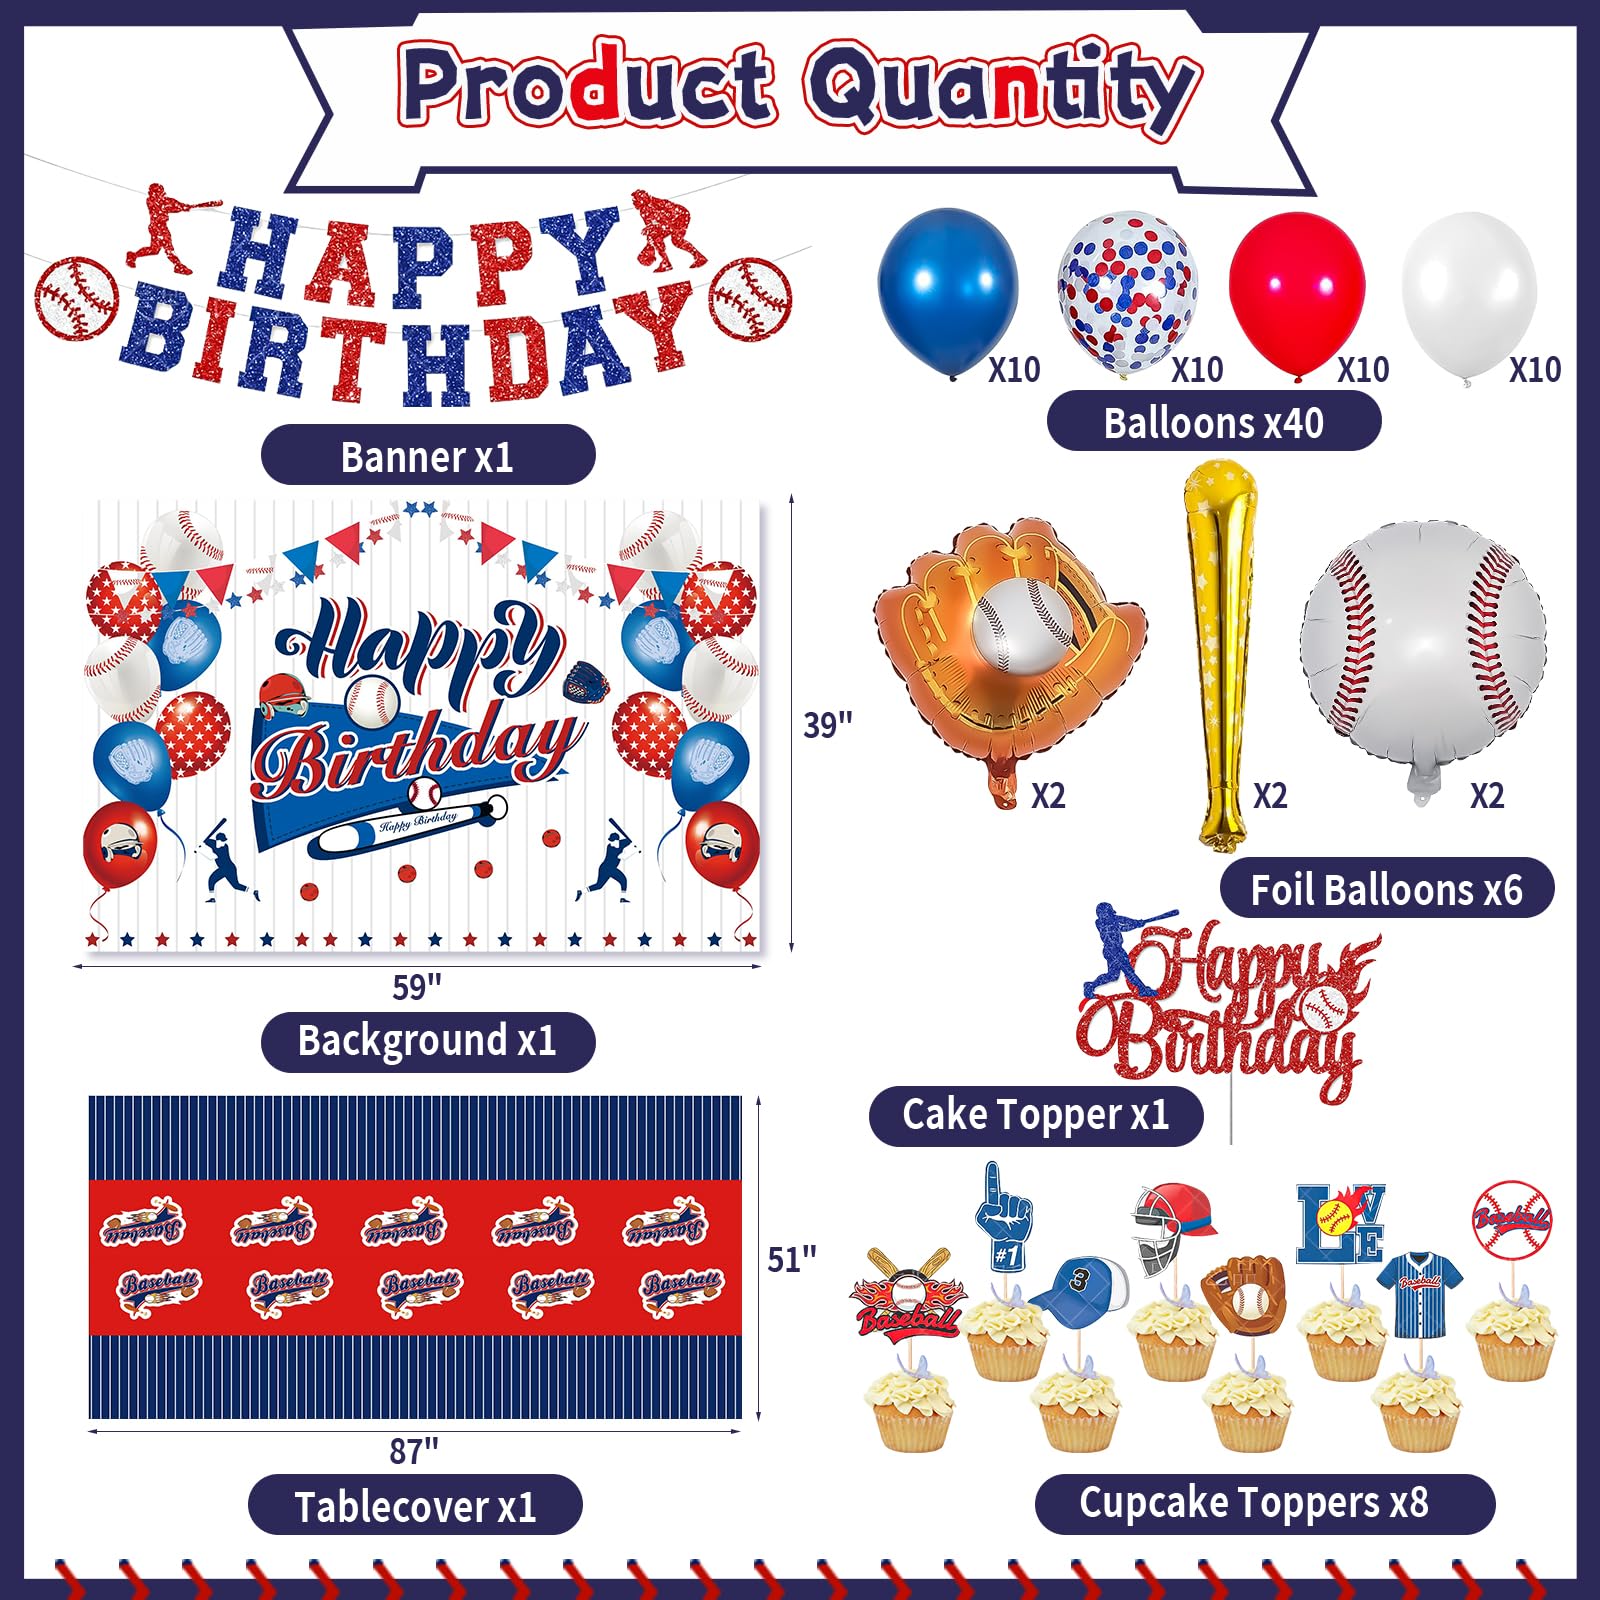 Baseball Birthday Party Decorations, Baseball Balloons Party Supplies, Including Navy Blue Balloons, Baseball theme Background, Tablecloth, Happy Birthday Banner, Cupcake/Cake Toppers